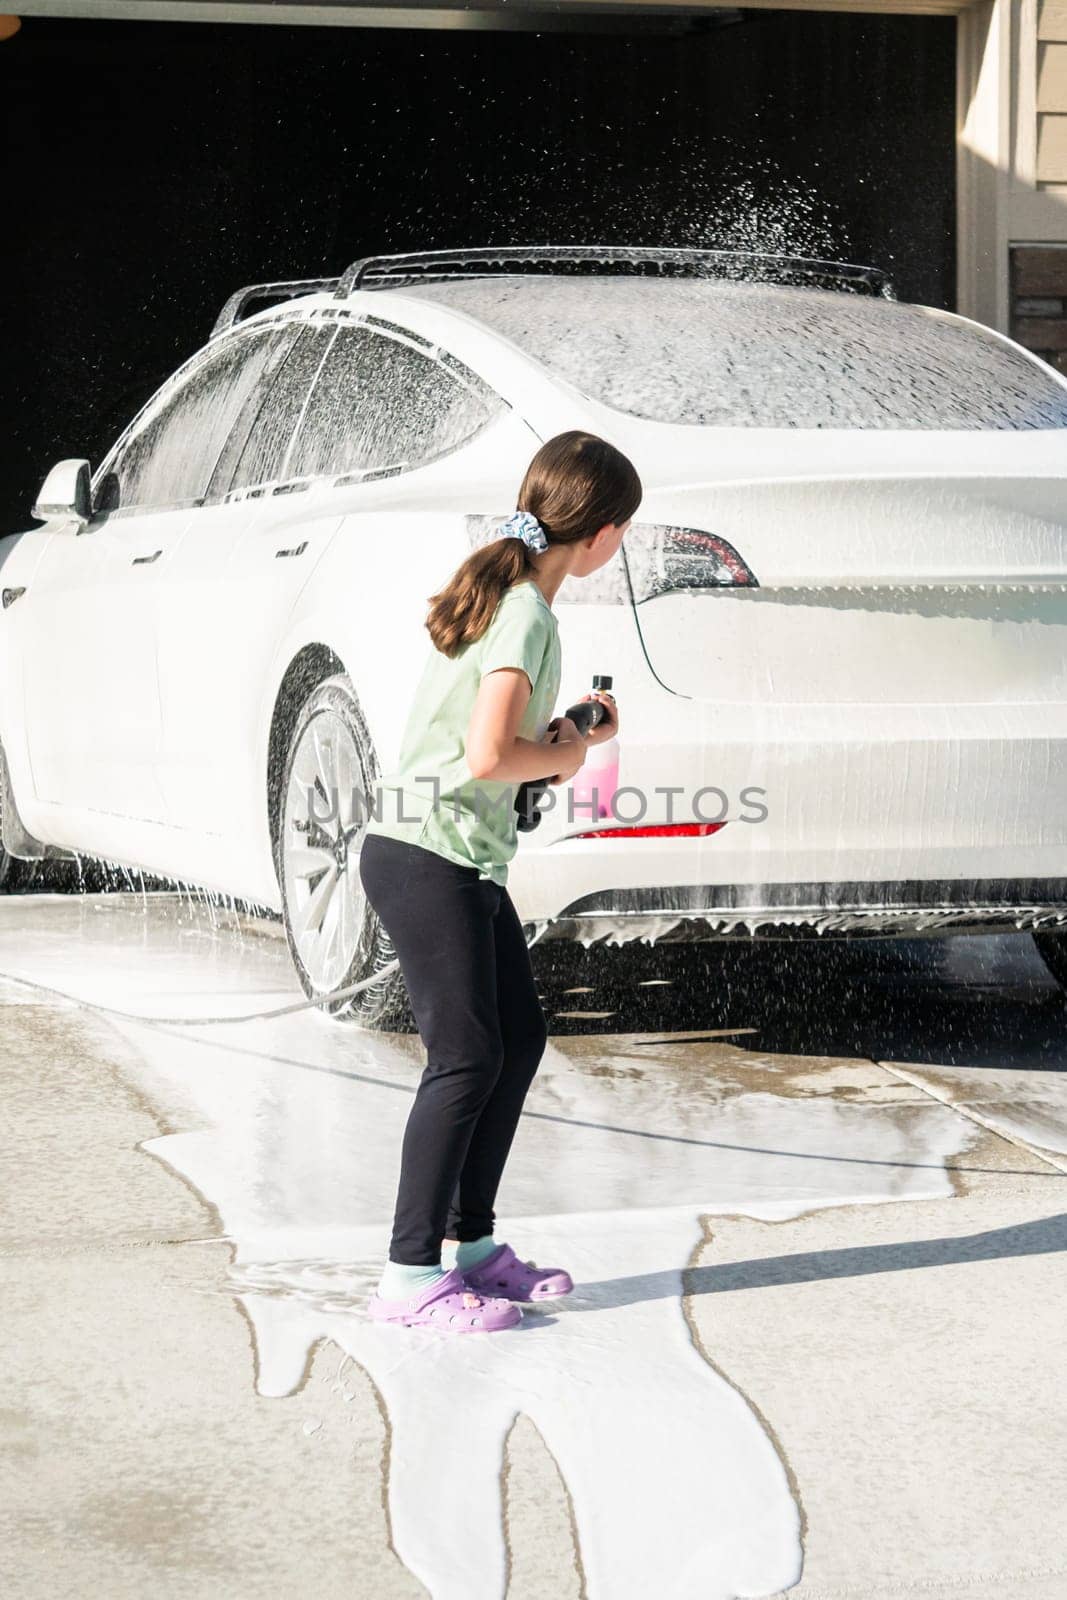 A young girl enthusiastically assists in washing the family's electric car in their suburban driveway.